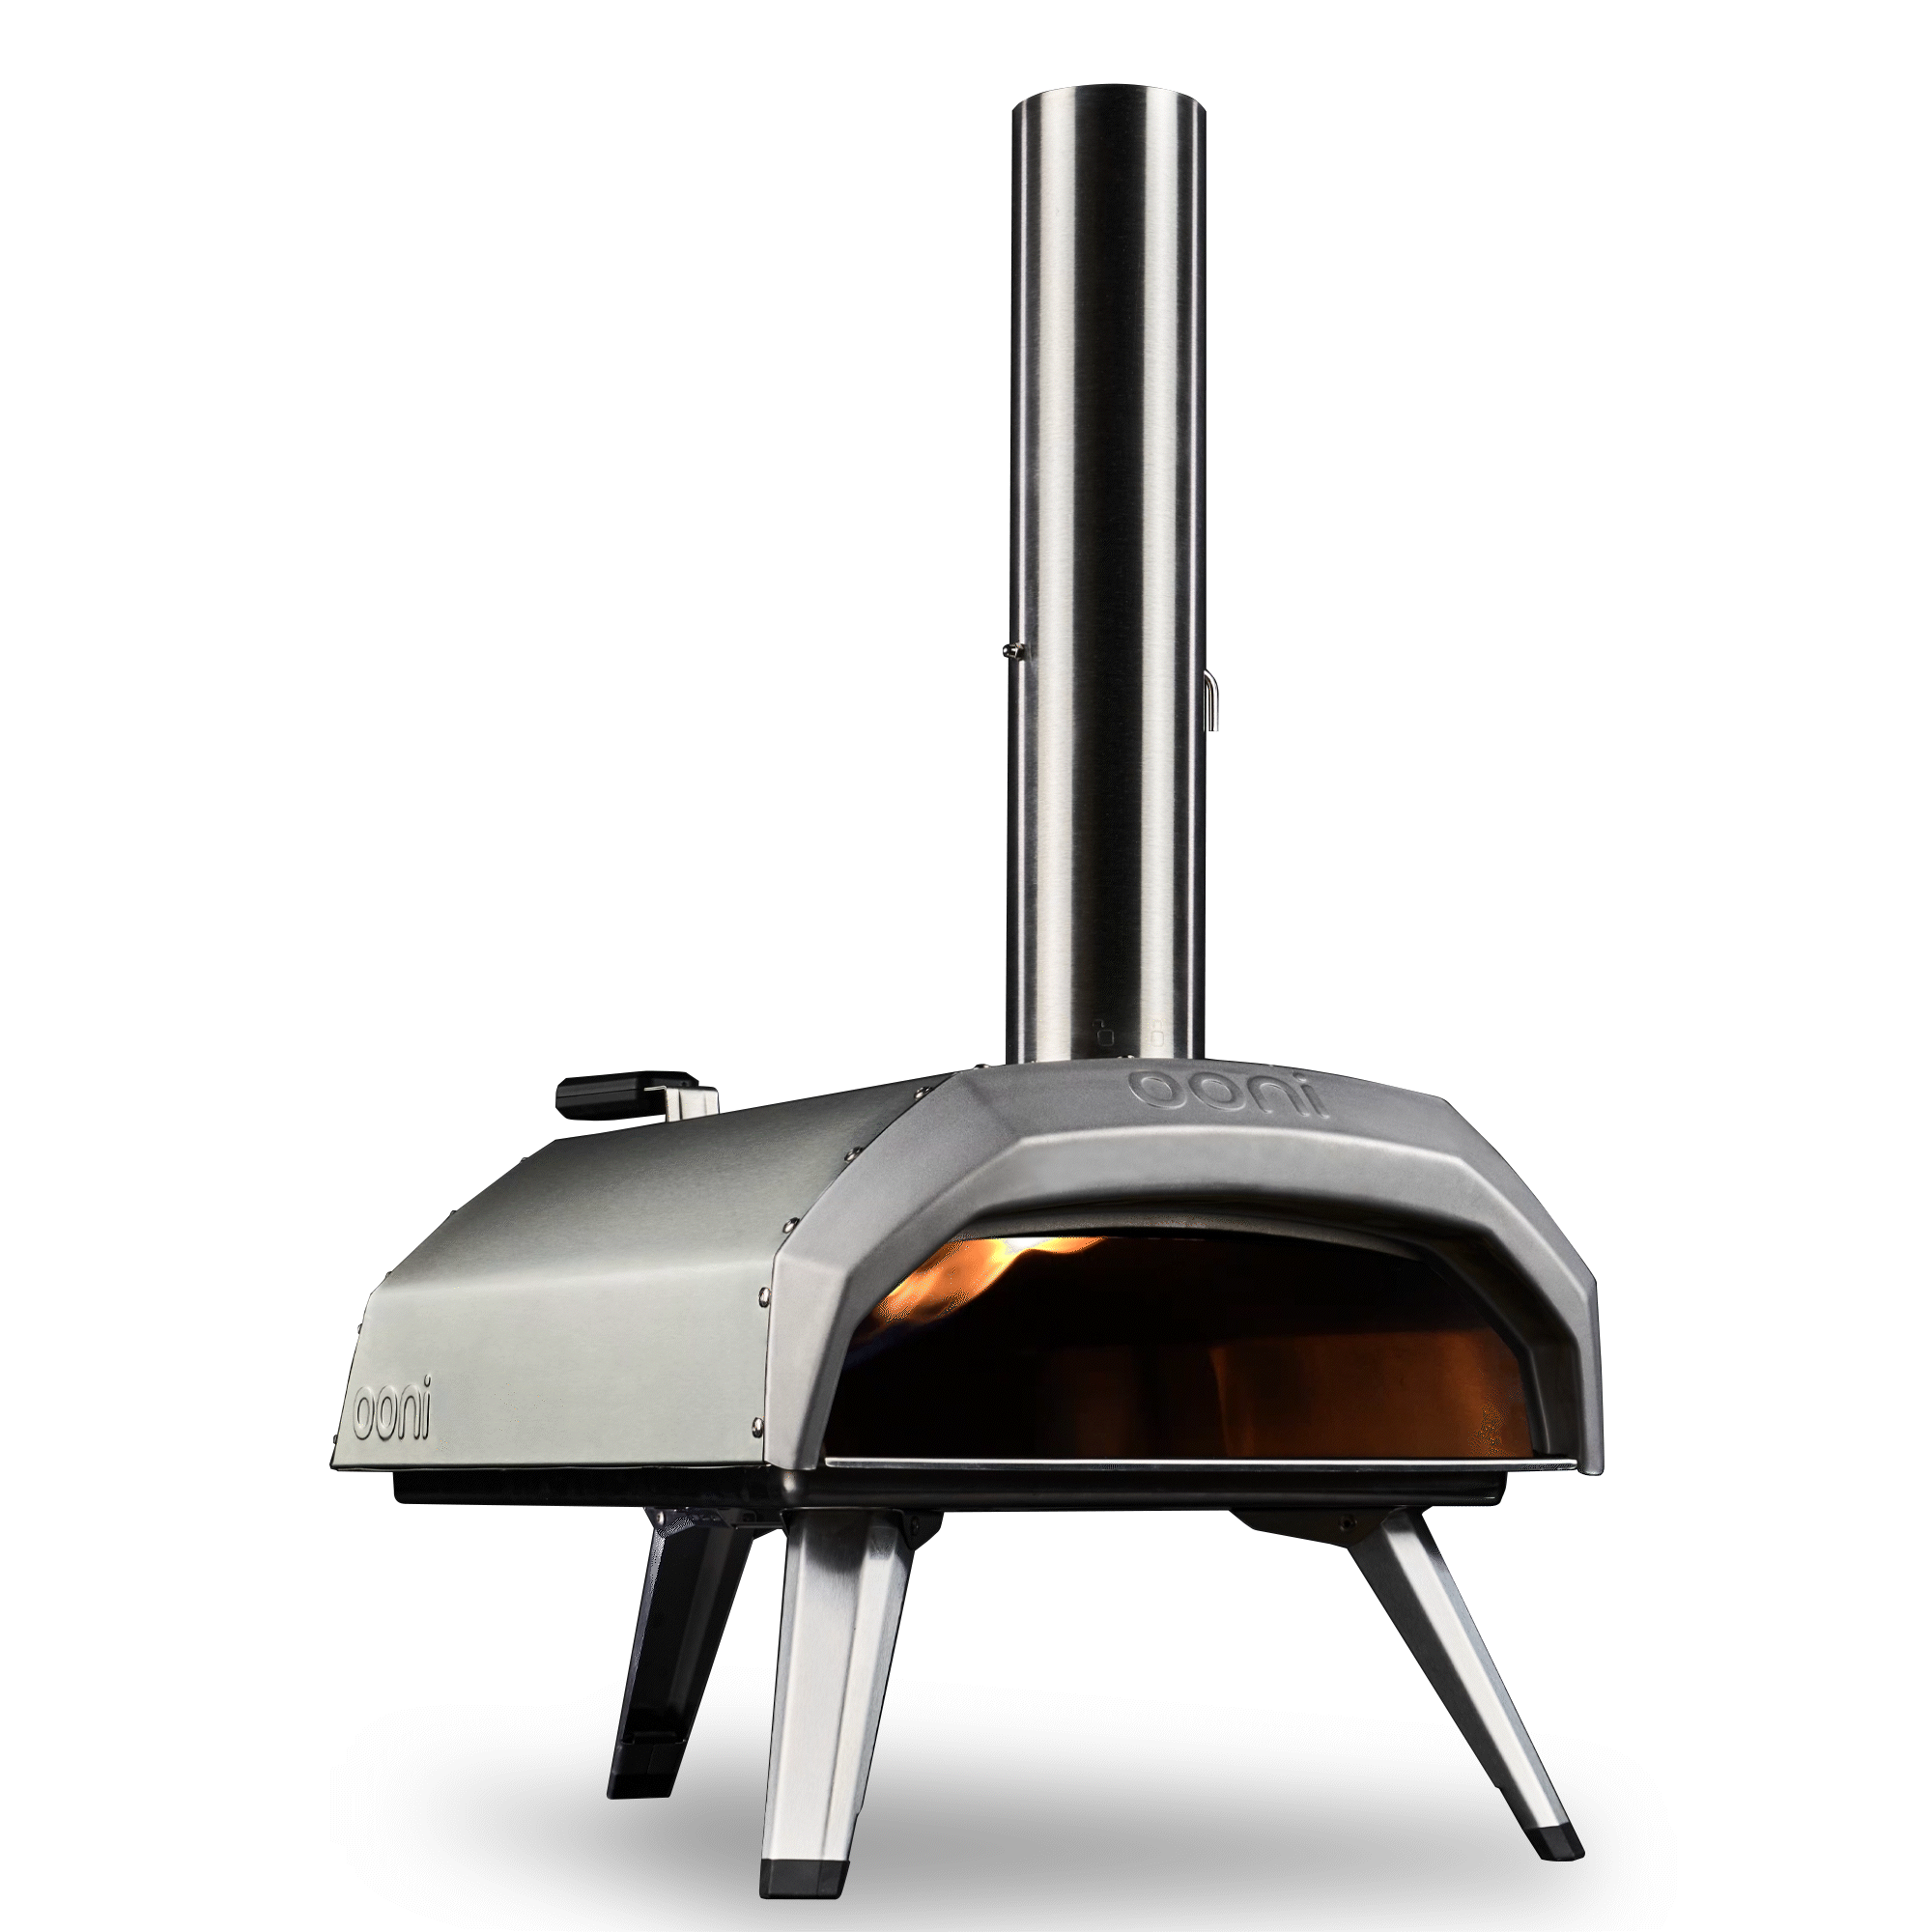 Shop Ooni Karu 12 Multi-Fuel Pizza Oven at the Gourmet Warehouse